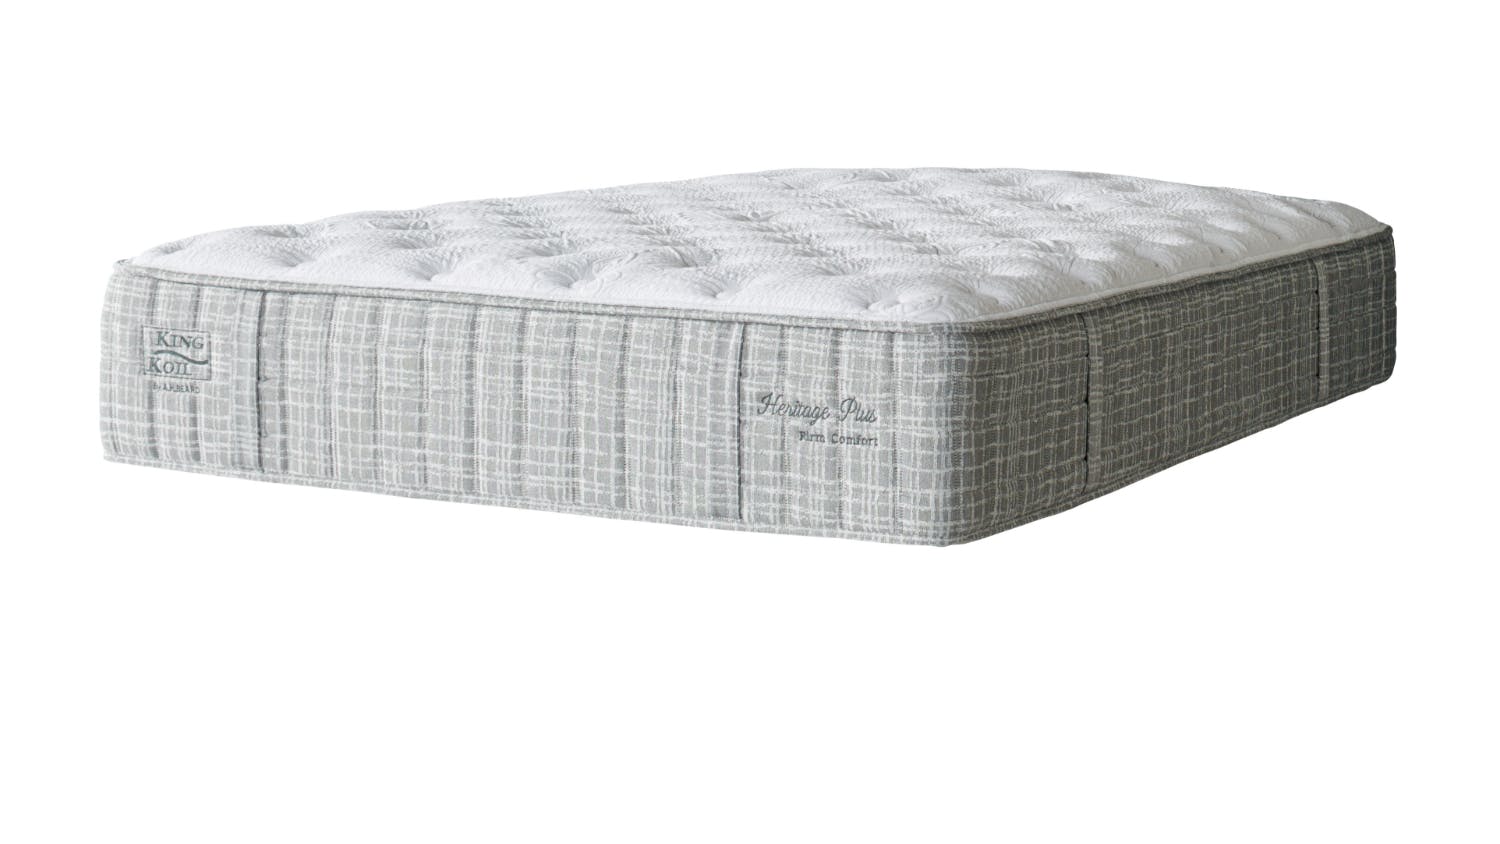 Heritage Plus Firm Extra Long Single Mattress by King Koil